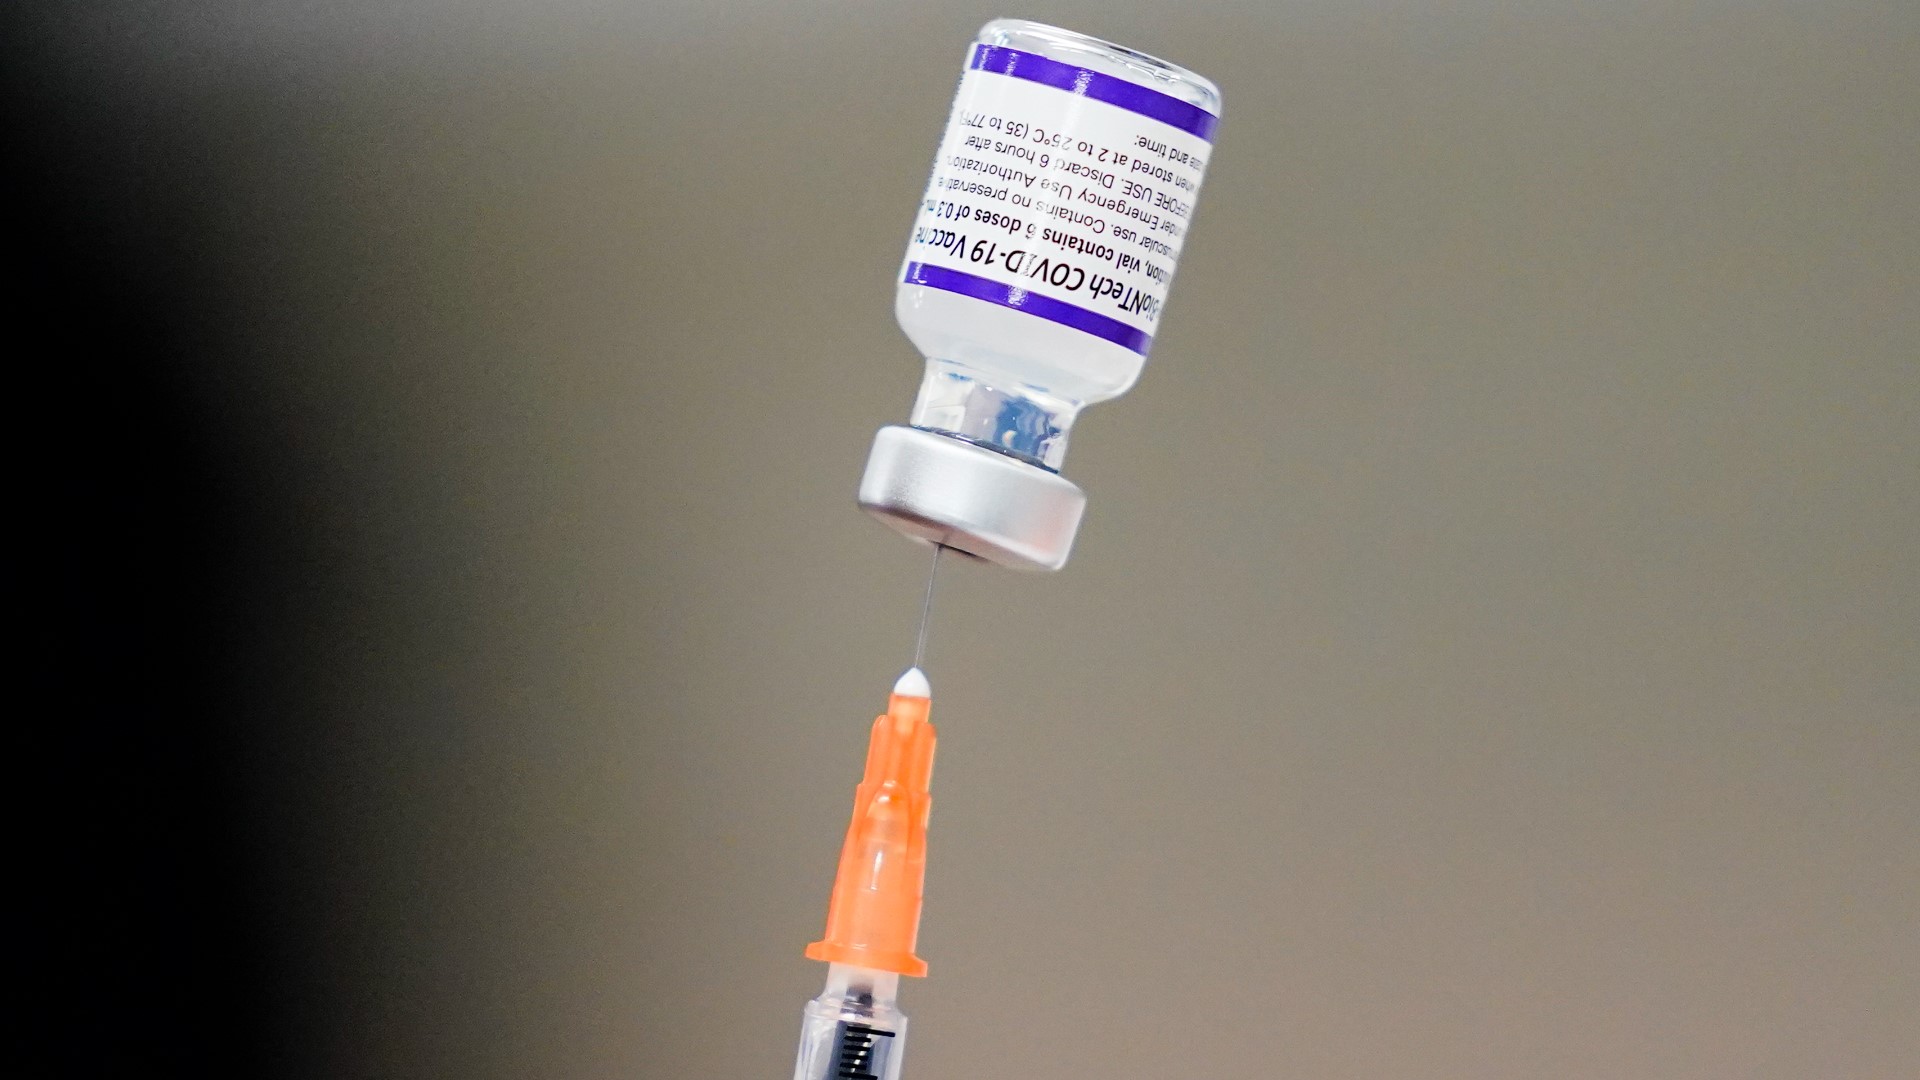 Just last week, the FDA authorized a second booster shot of the Pfizer or Moderna COVID-19 vaccines for those age 50 and older and certain immunocompromised people.